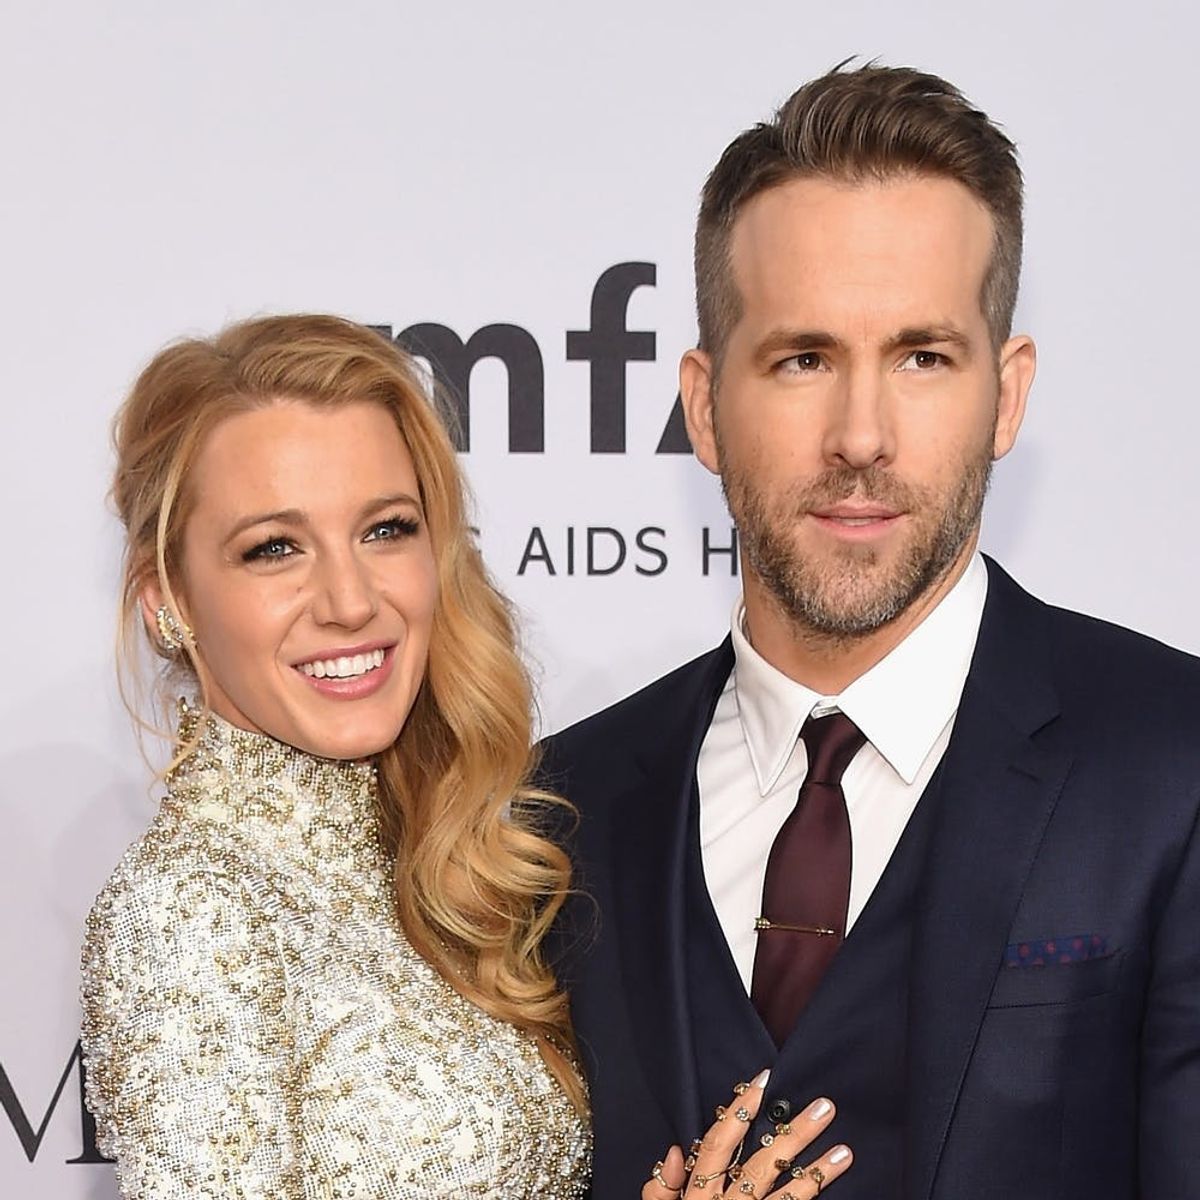 11 Celeb Couples Who Beat the Odds Despite This Scientific Relationship Red Flag